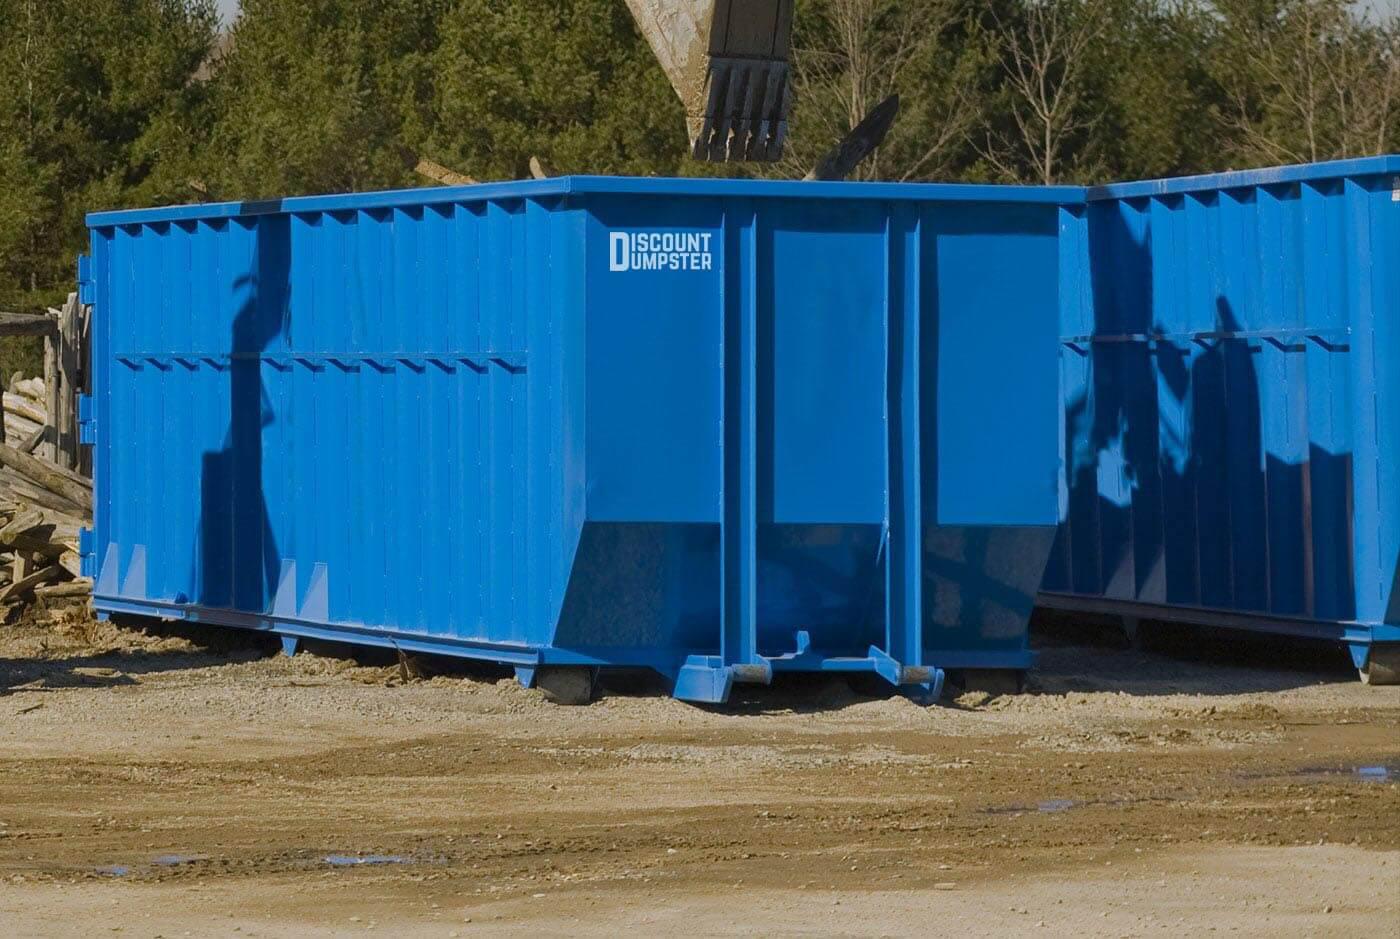 Discount dumpster has roll off dumpsters in the chicago area